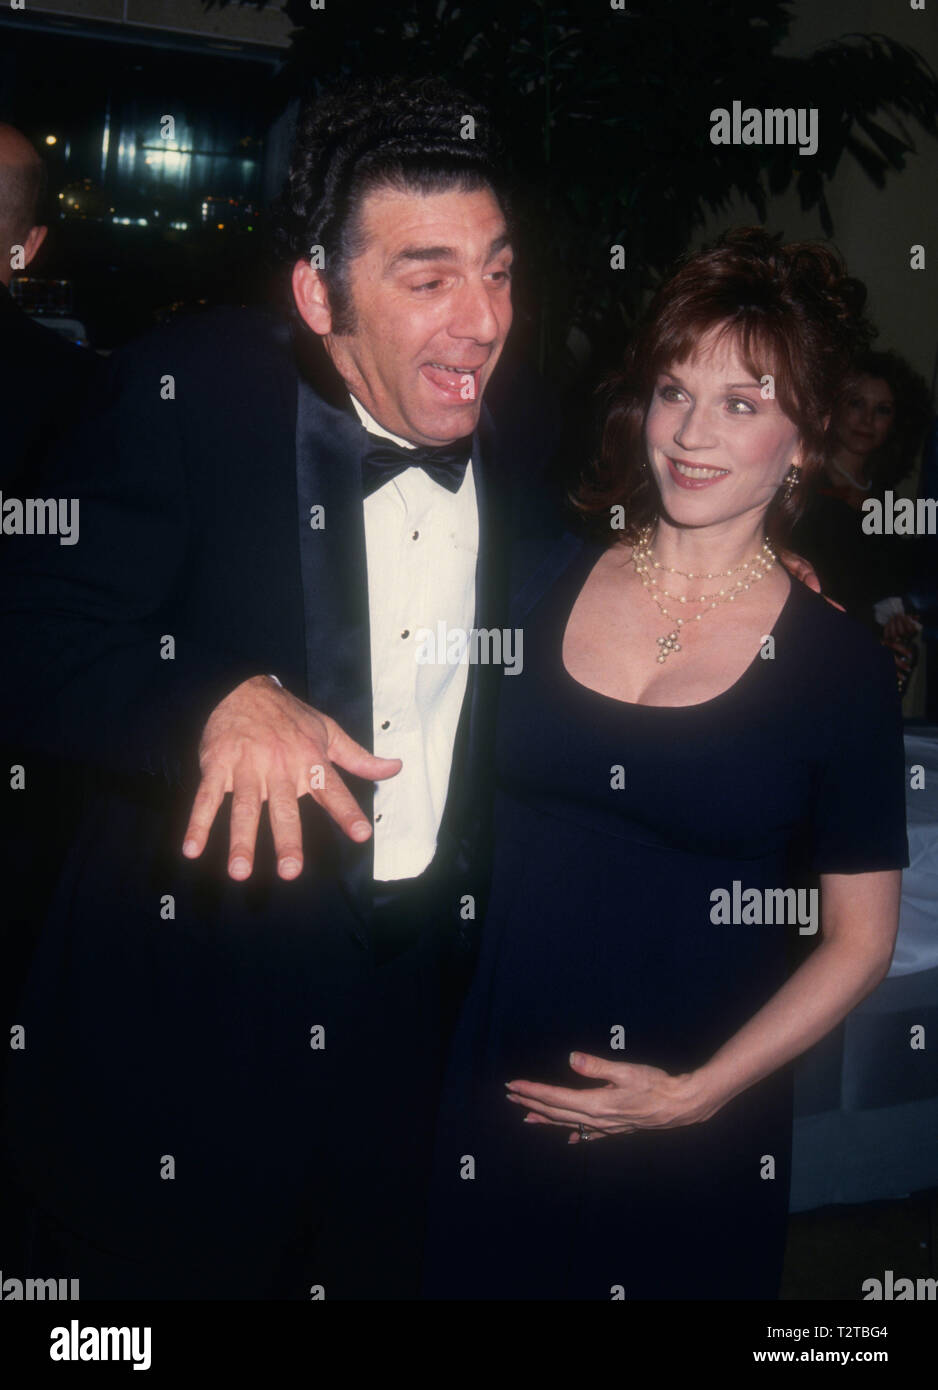 BEVERLY HILLS, CA - MARCH 13: Actor Michael Richards and actress Marilu Henner attends the 46th Annual Writers Guild of America Awards on March 13, 1994 at the Beverly Hilton Hotel in Beverly Hills, California. Photo by Barry King/Alamy Stock Photo Stock Photo